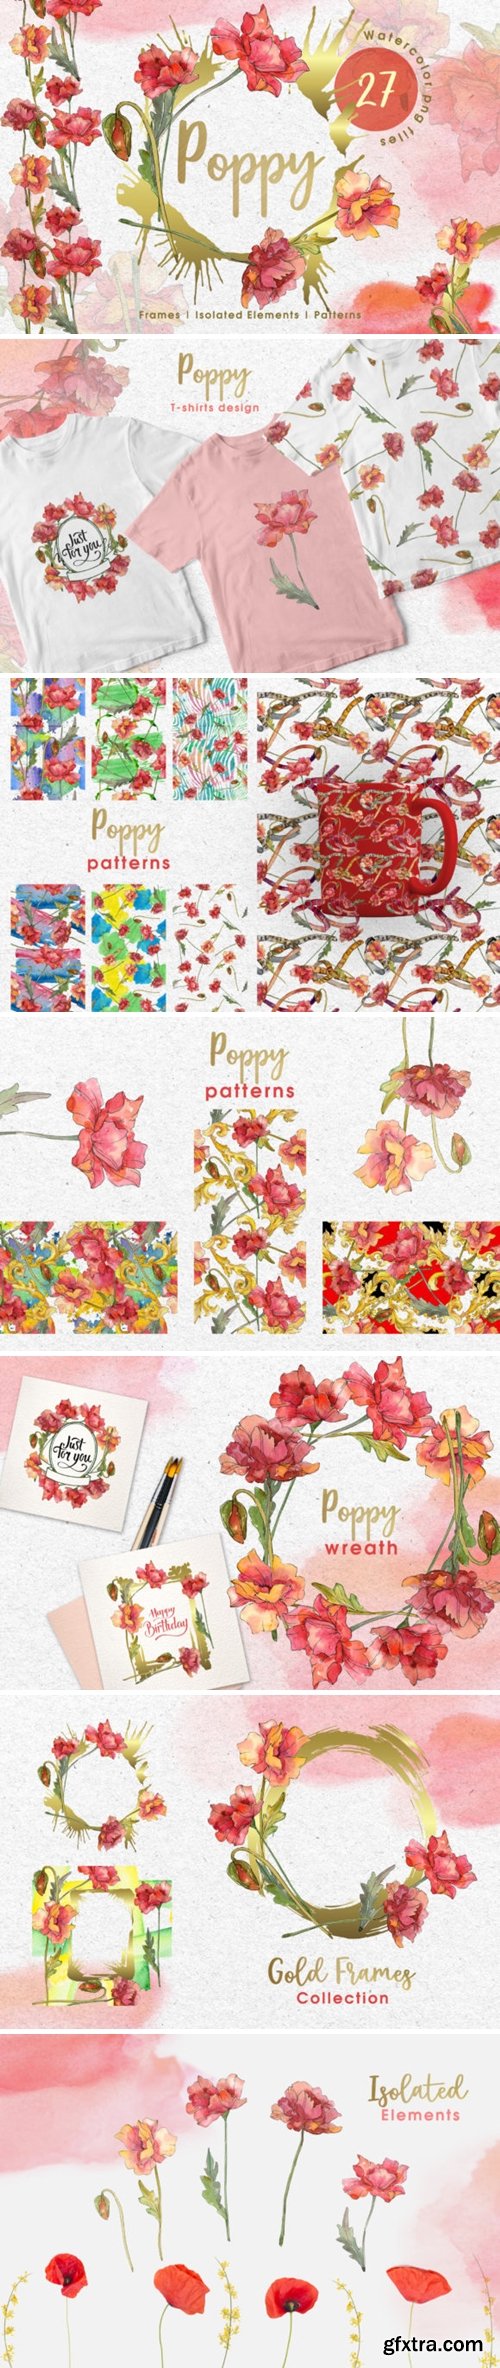 Red Watercolor Poppies PNG - Graphics 1467520